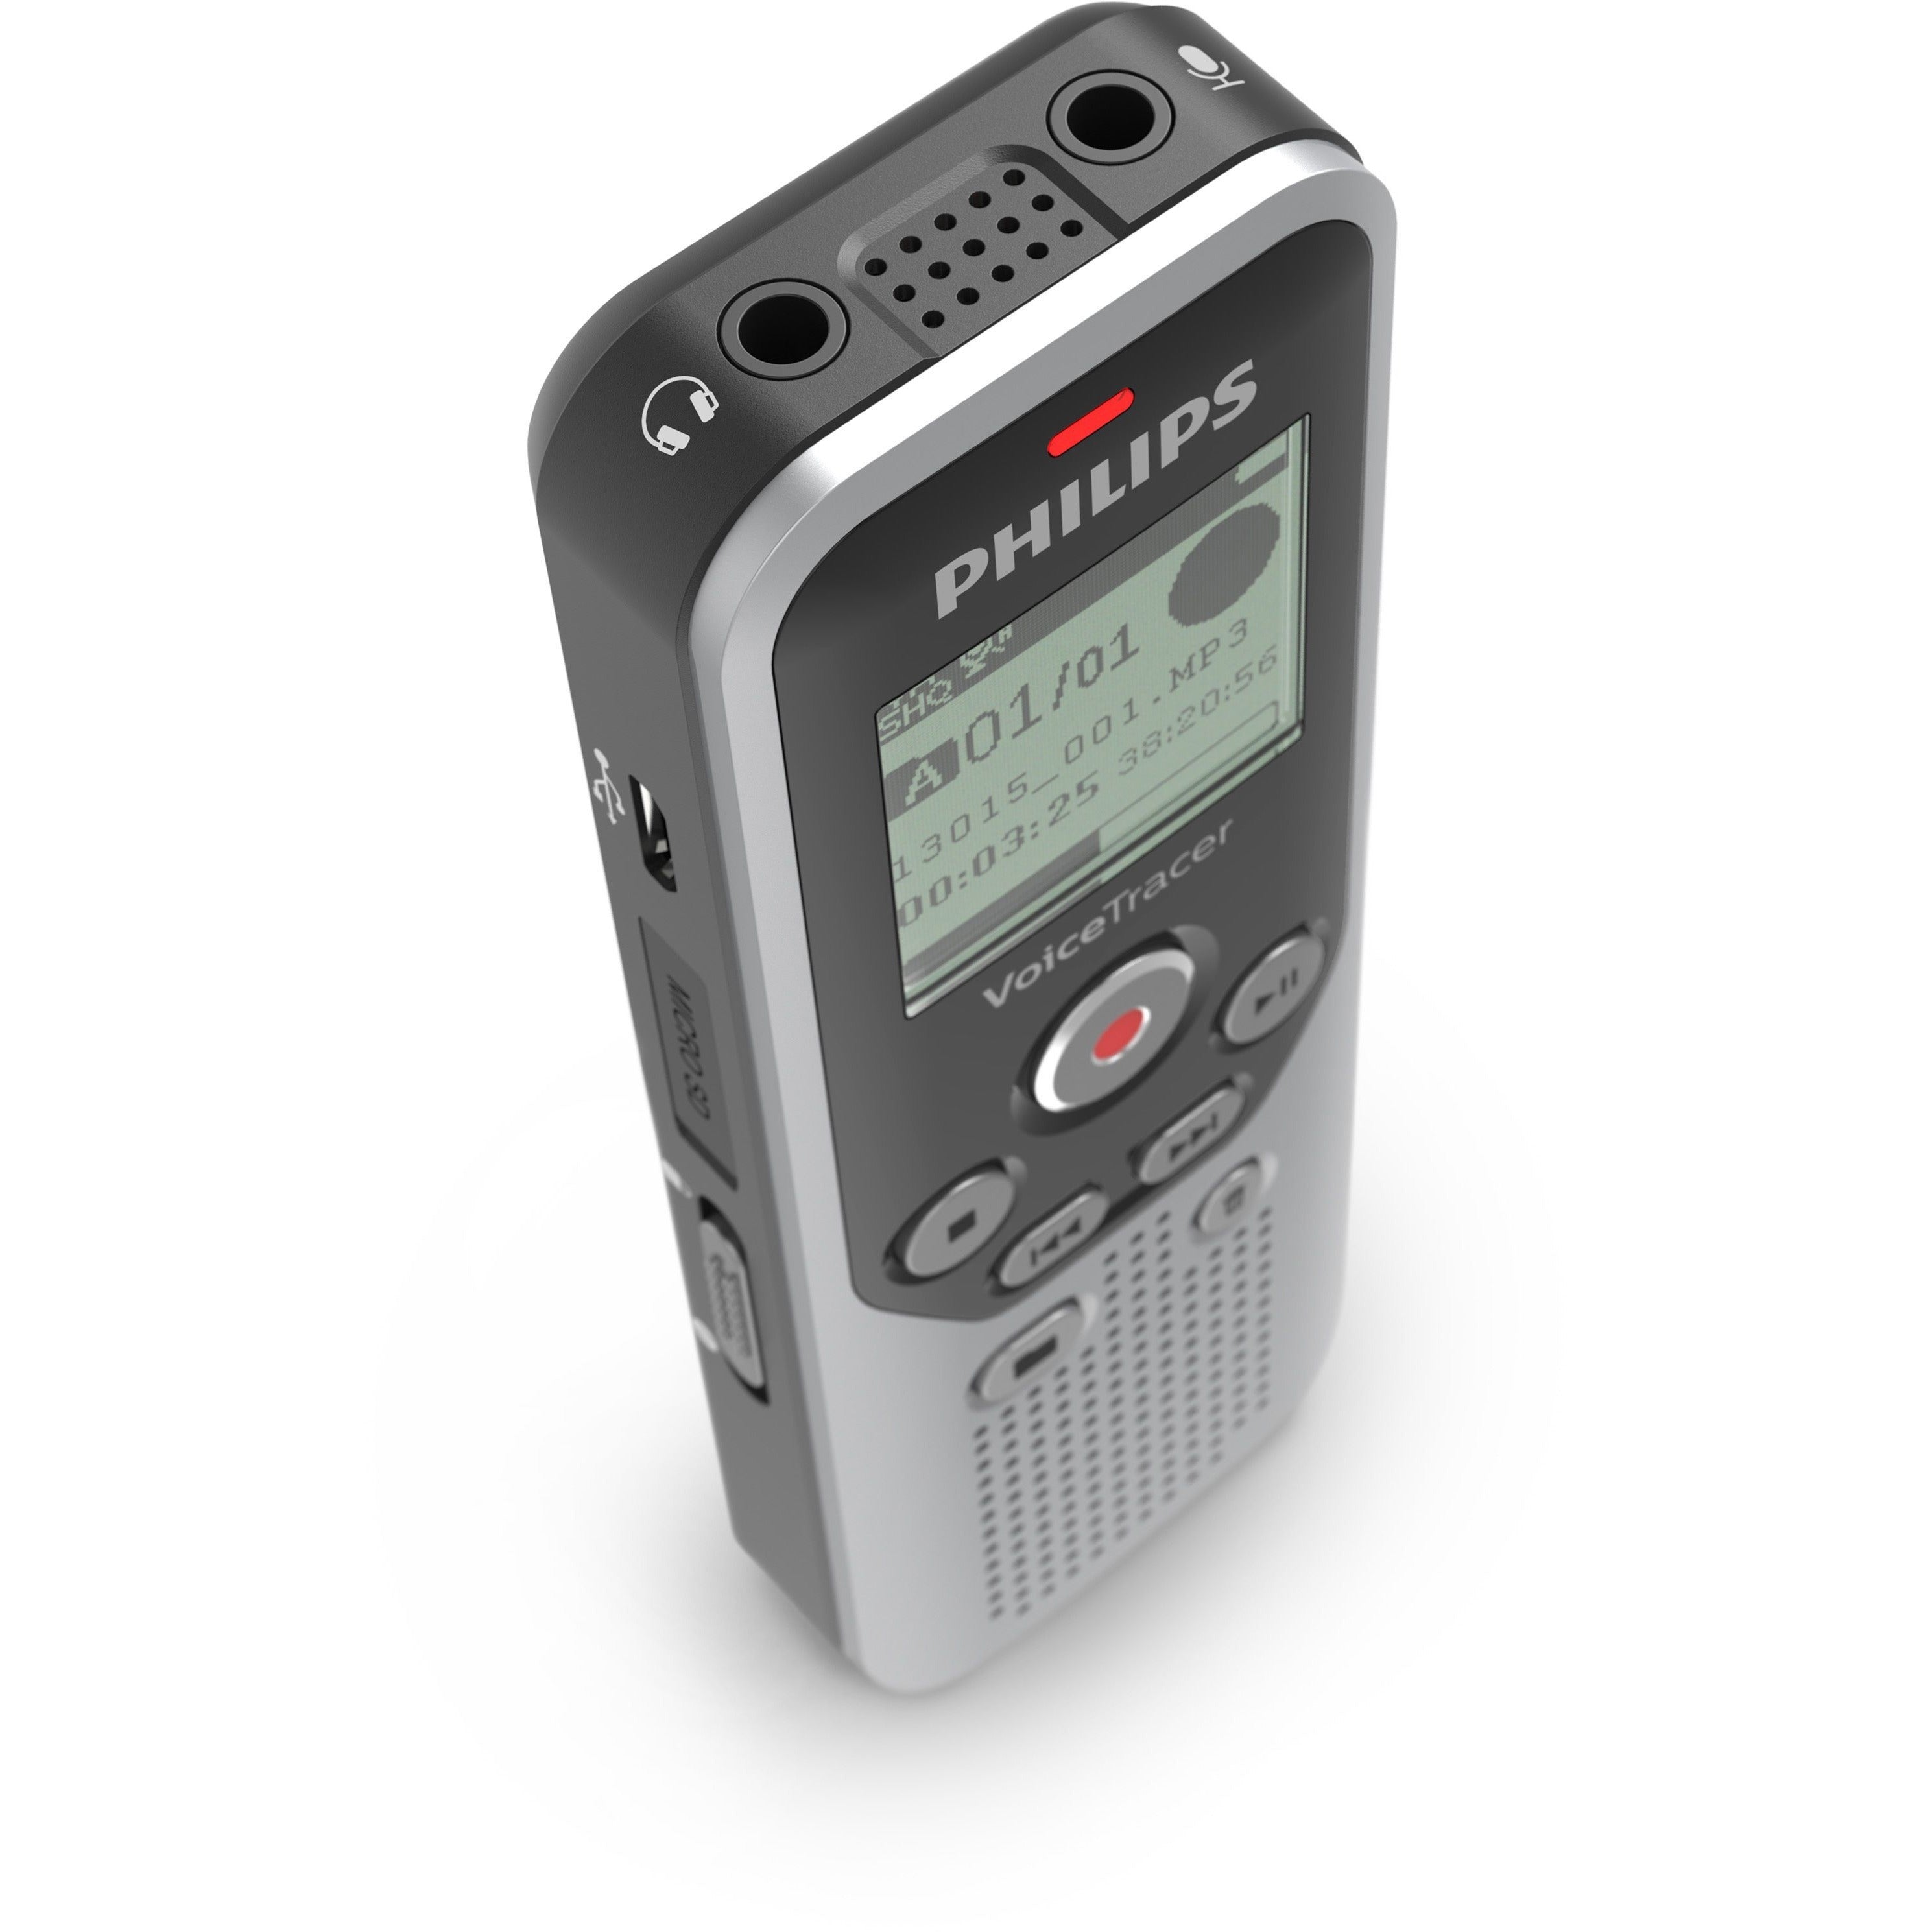 philips-voice-tracer-audio-recorder-dvt1250-8-gbmicrosd-sd-supported-13-lcd-wav-headphone-583-hourspeacerecording-time-portable_pspdvt1250 - 5